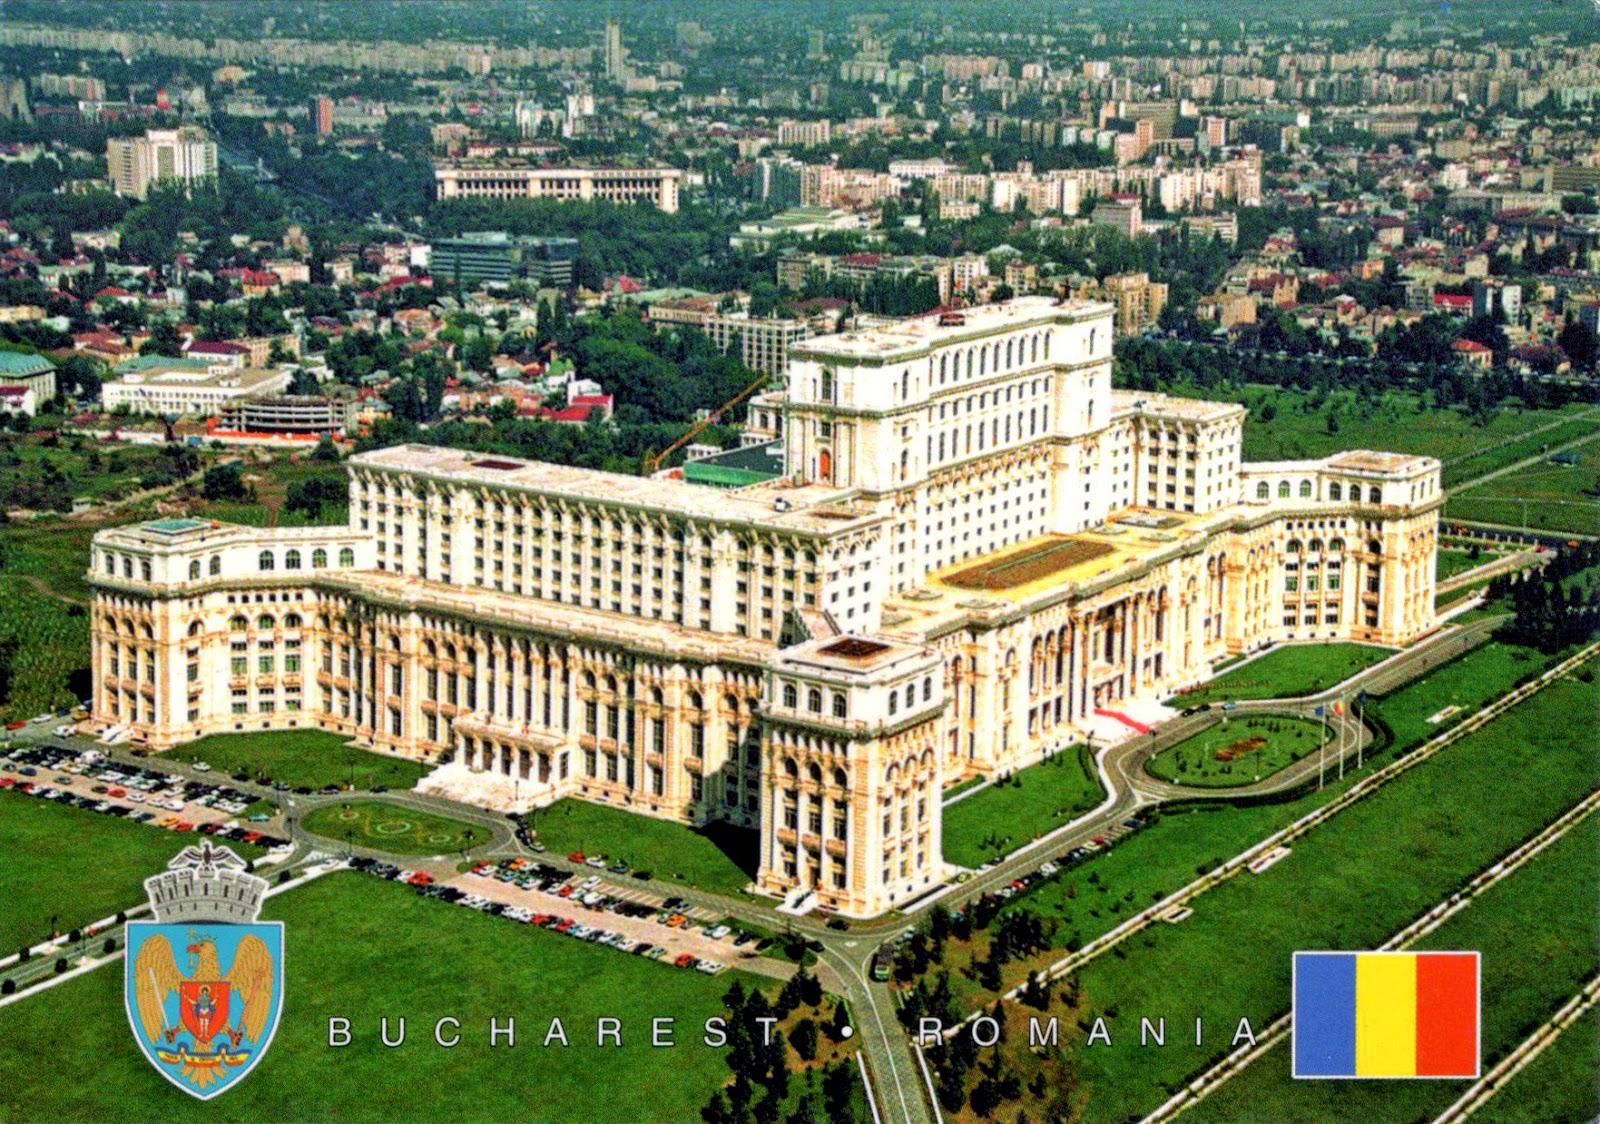 WORLD, COME TO MY HOME!: 1595 ROMANIA (Bucharest)